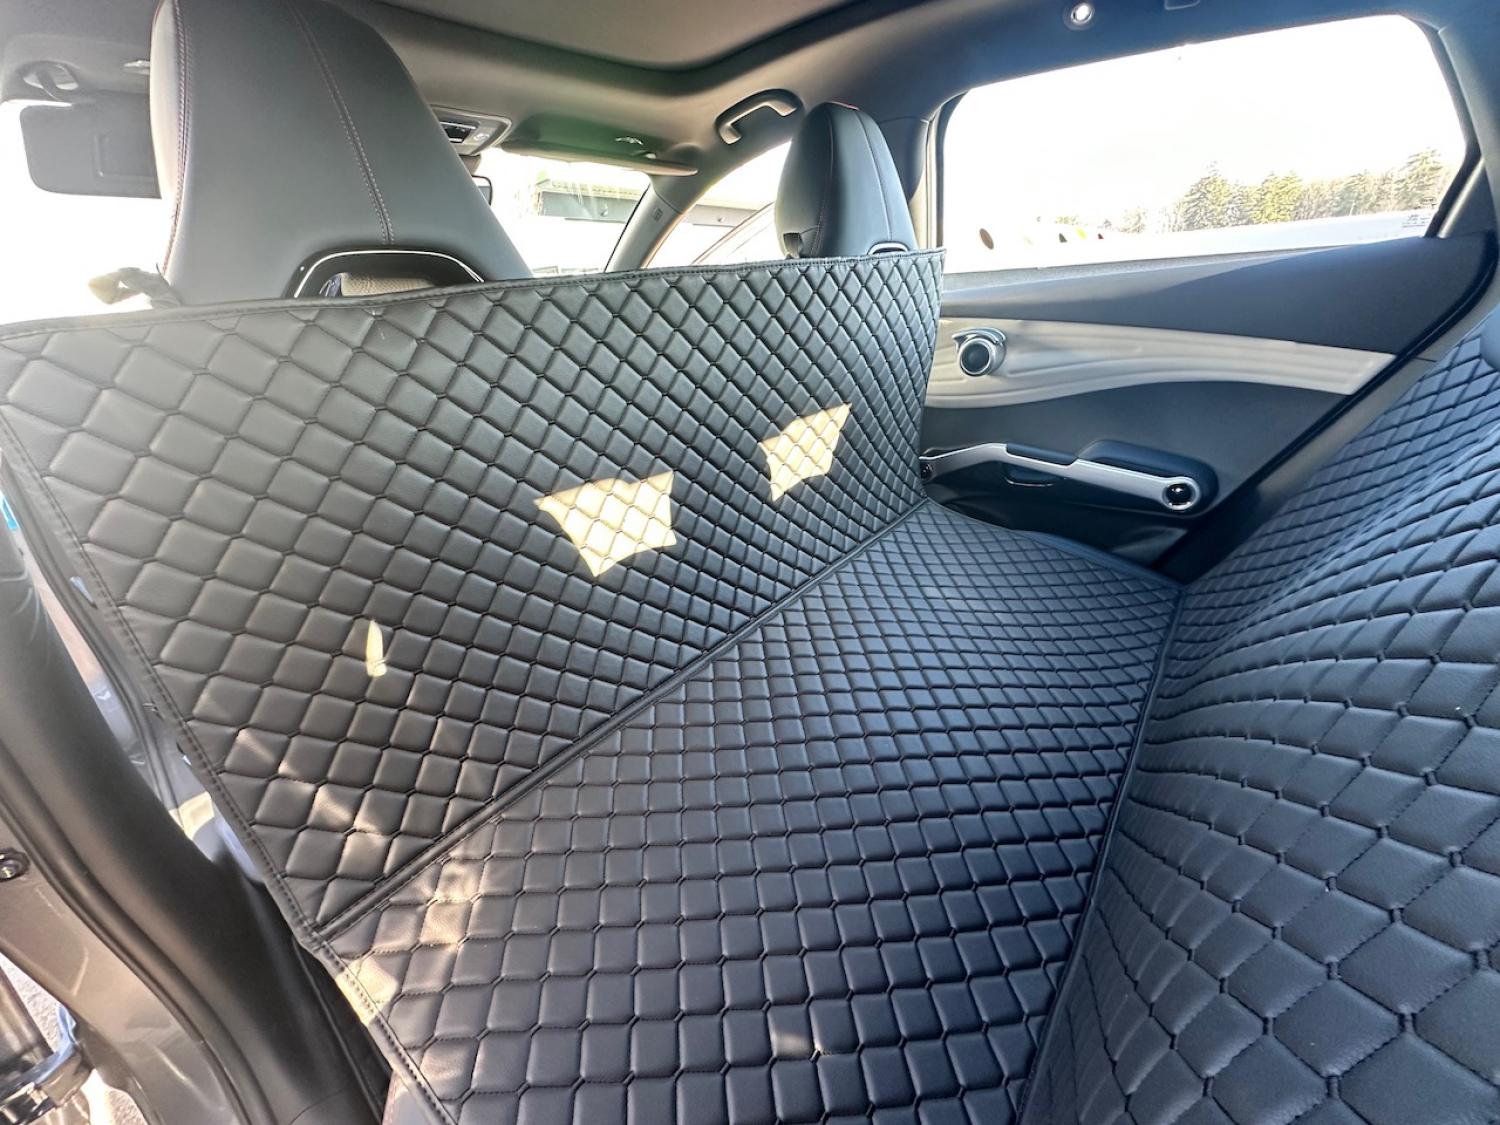 CARSTYLER® Back Seat Cover Geeignet Für MG ZS